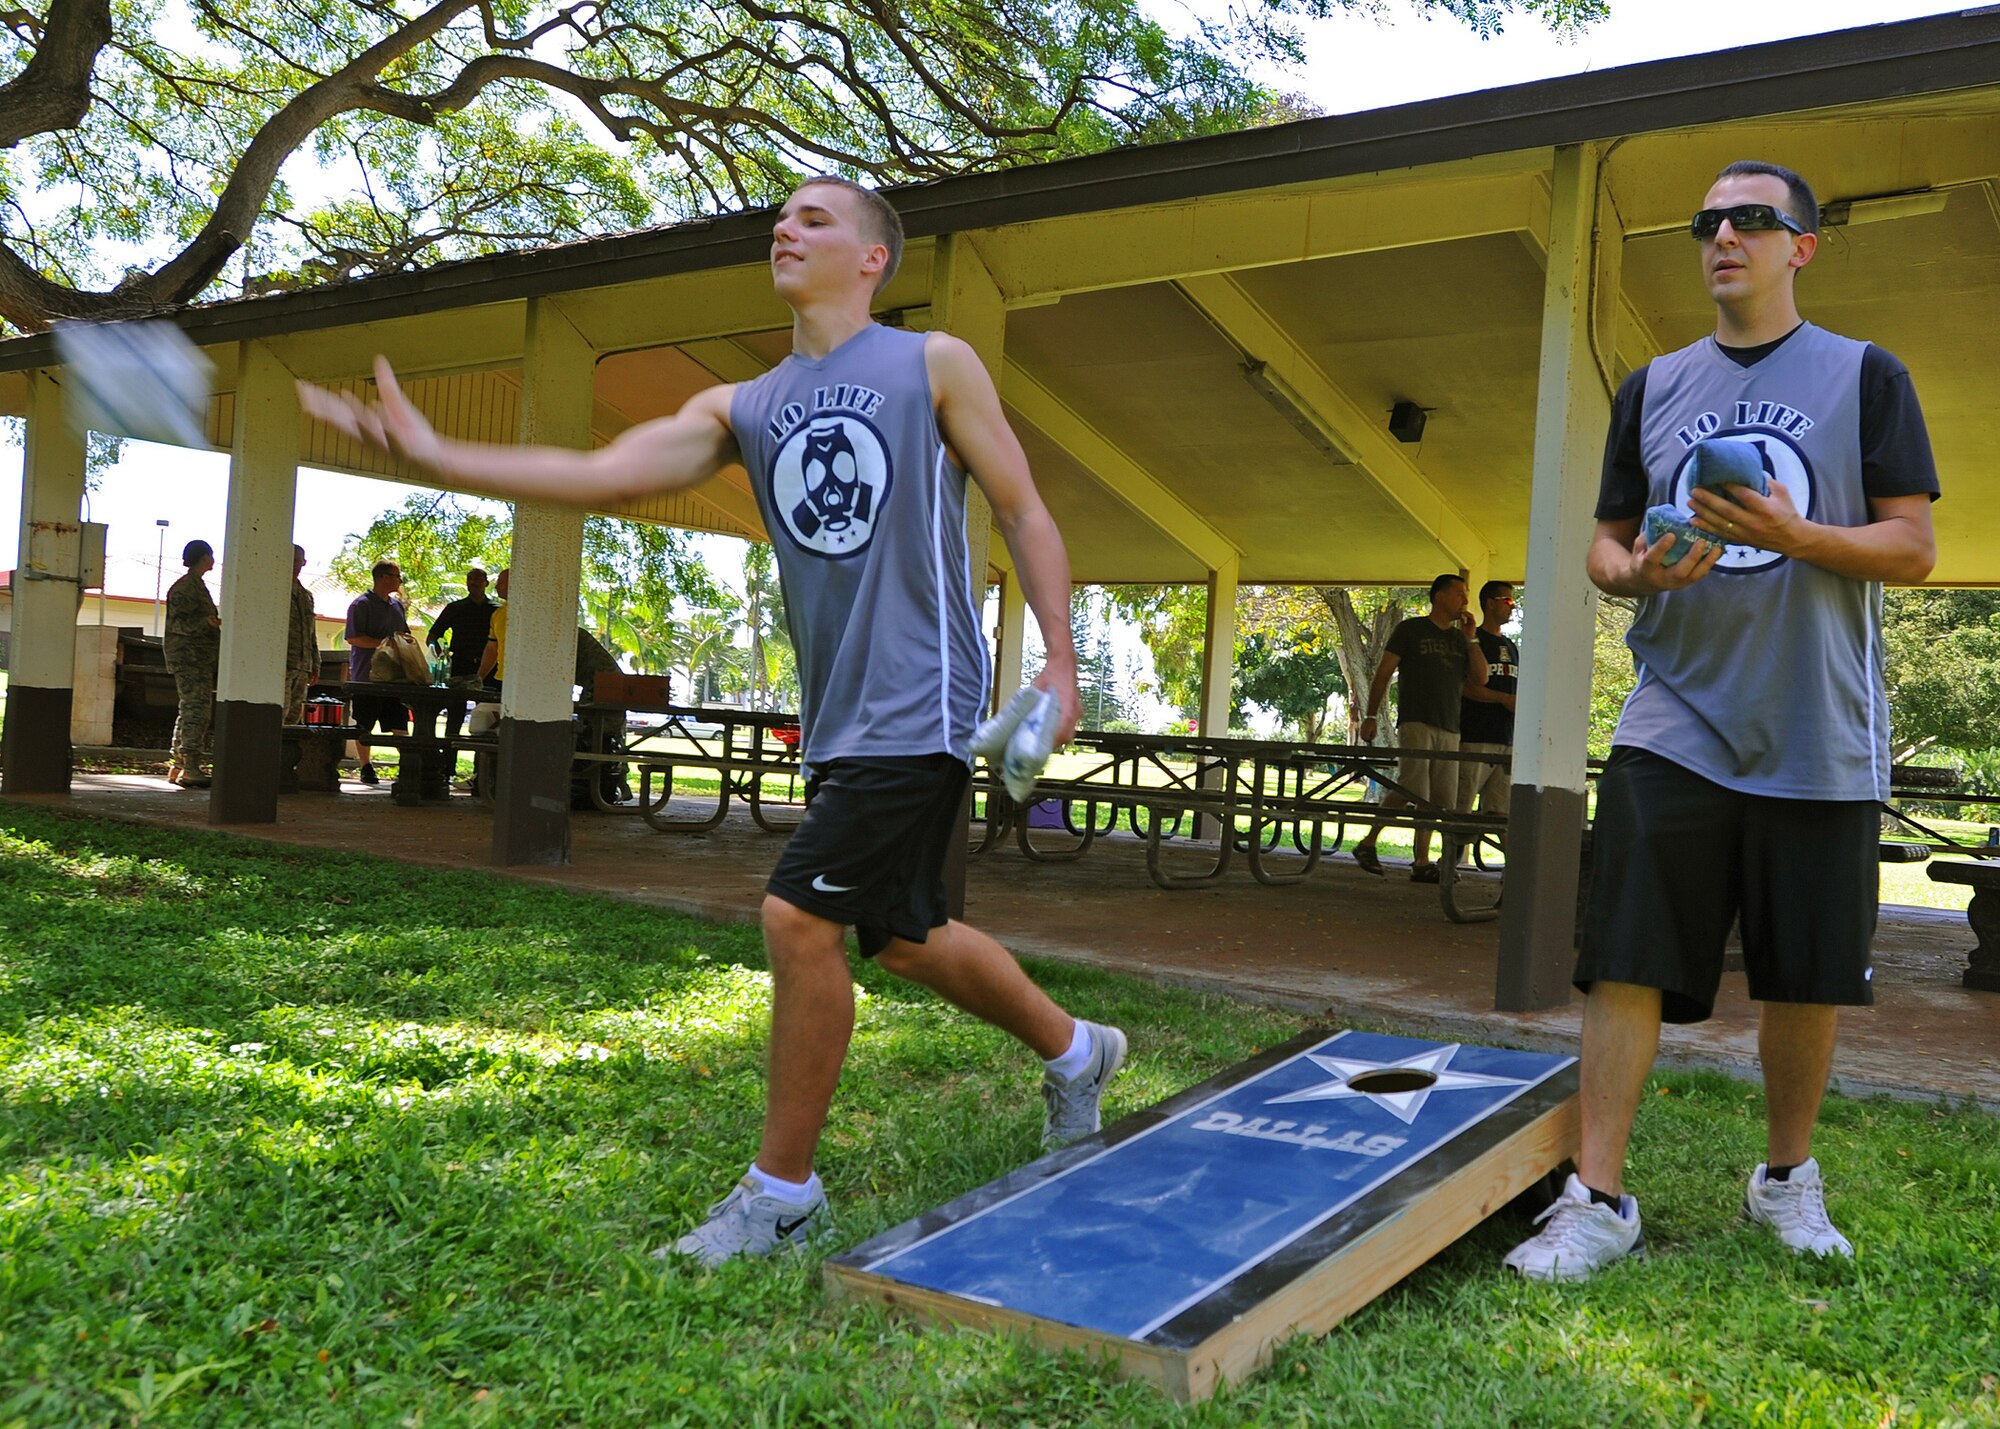 Airmen from the 15th Maintenance Group compete in a corn-hole competition during the group’s Wingman Day at Joint Base Pearl Harbor-Hickam, Hawaii, Feb. 20, 2014. Wingman Day highlights the importance of being a good teammate, wingman and the importance of making smart decisions. (U.S. Air Force photo/Master Sgt. Jerome S. Tayborn)